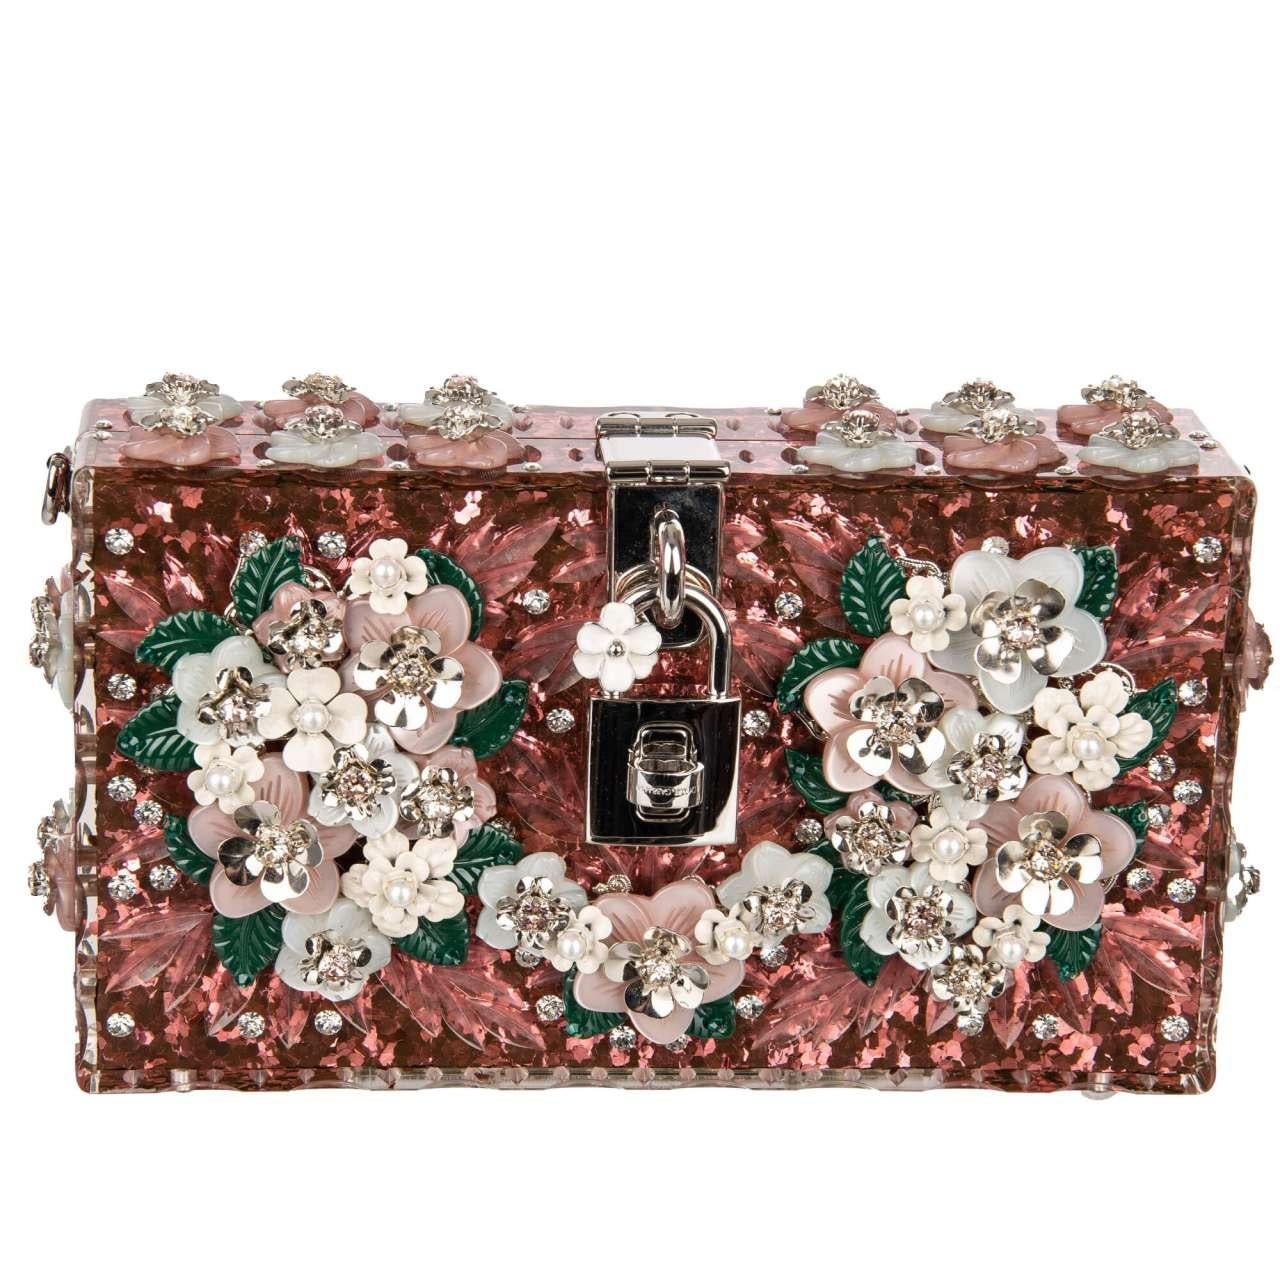 D&G Glitter Plexiglass Clutch Bag DOLCE BOX with Flowers and Crystals Pink In Excellent Condition For Sale In Erkrath, DE